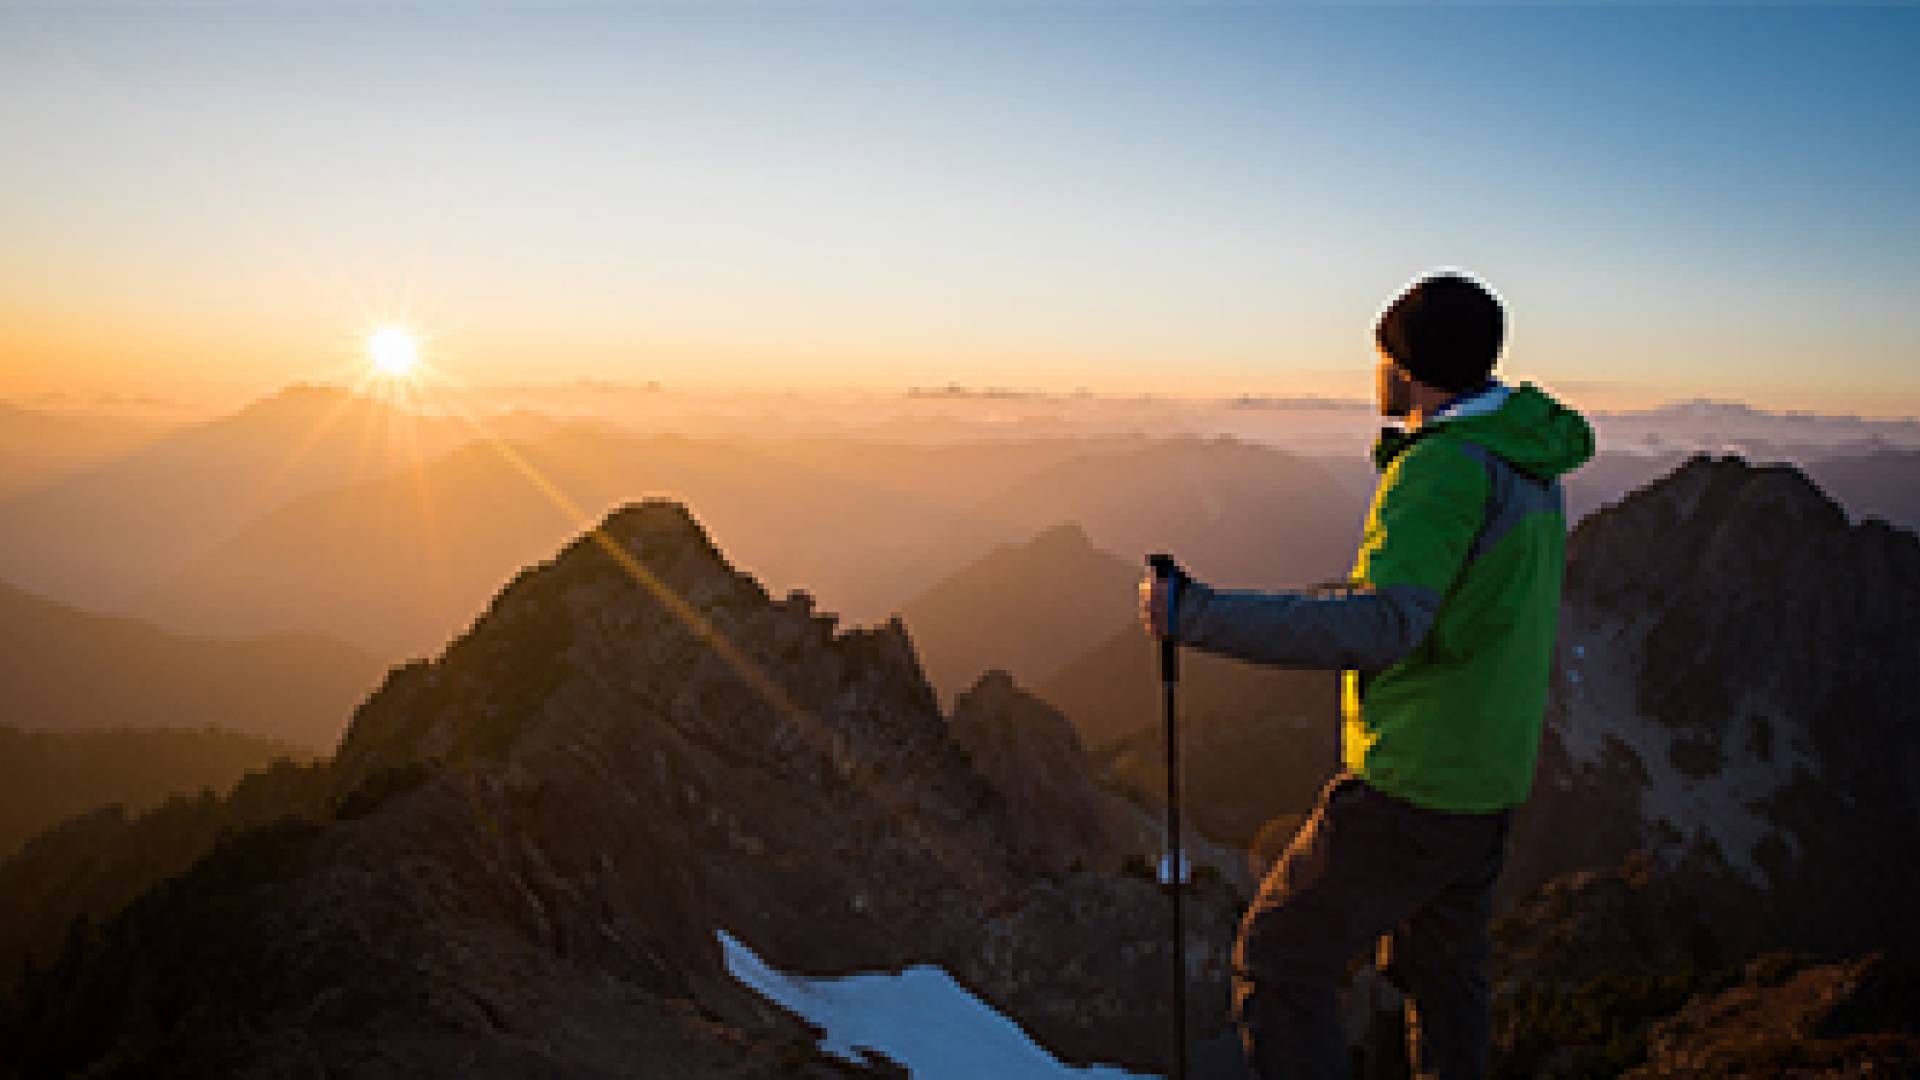 A hiker watching the sunrise on a mountain peak.